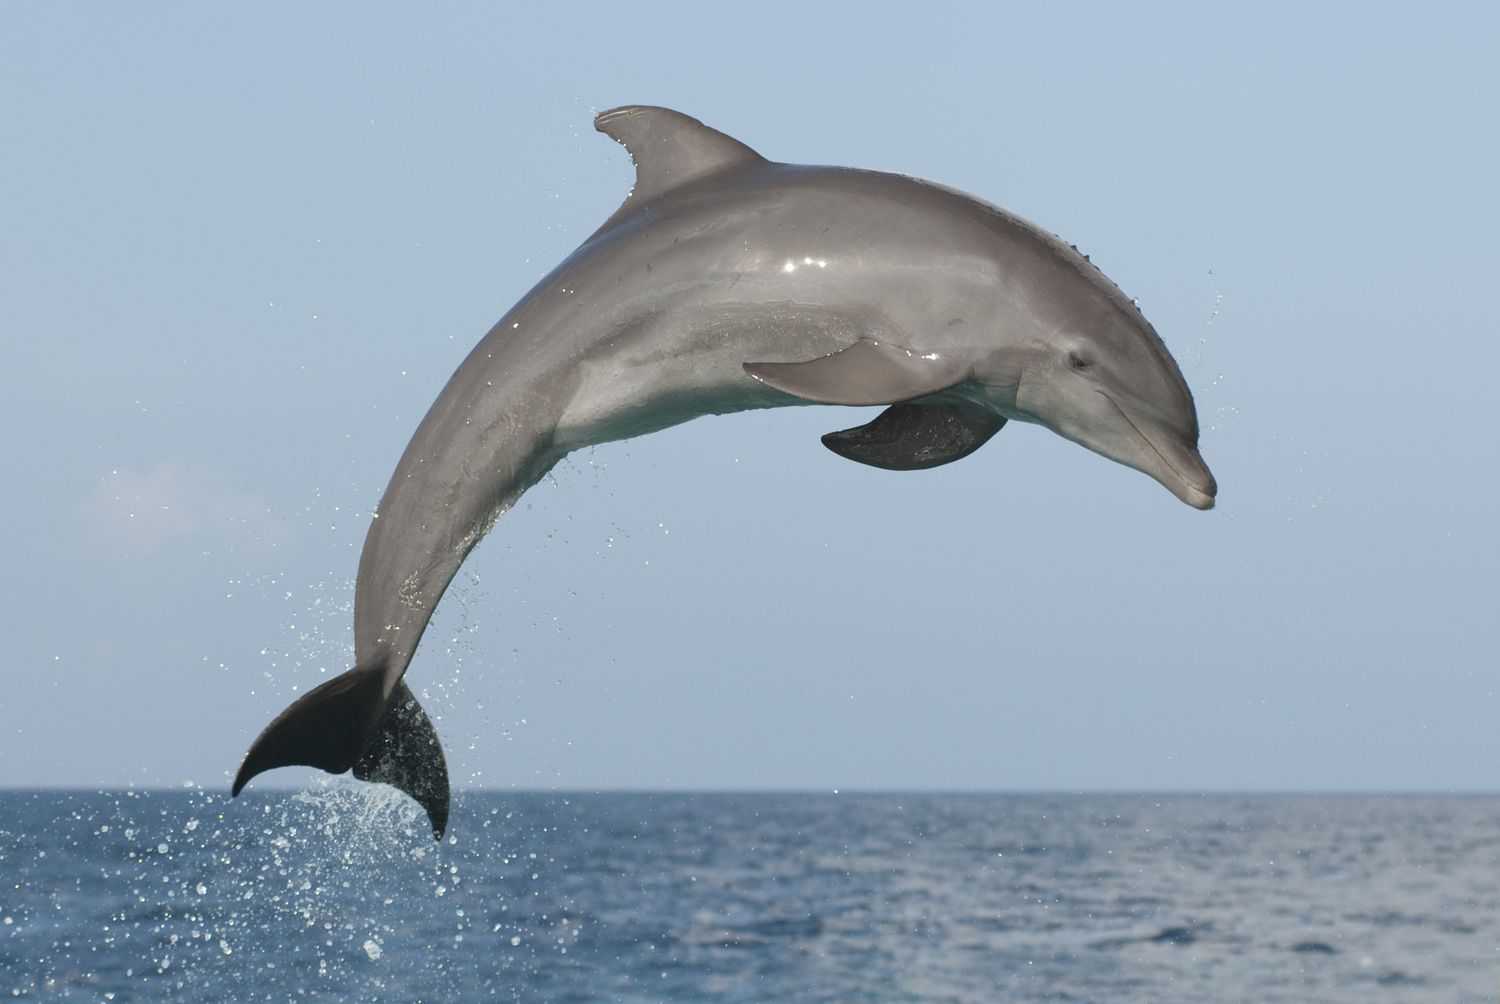 atlantic-bottlenose-dolphin--jumping-high-during-a-dolphin-training-demonstration-154724035-59ce93949abed50011352530